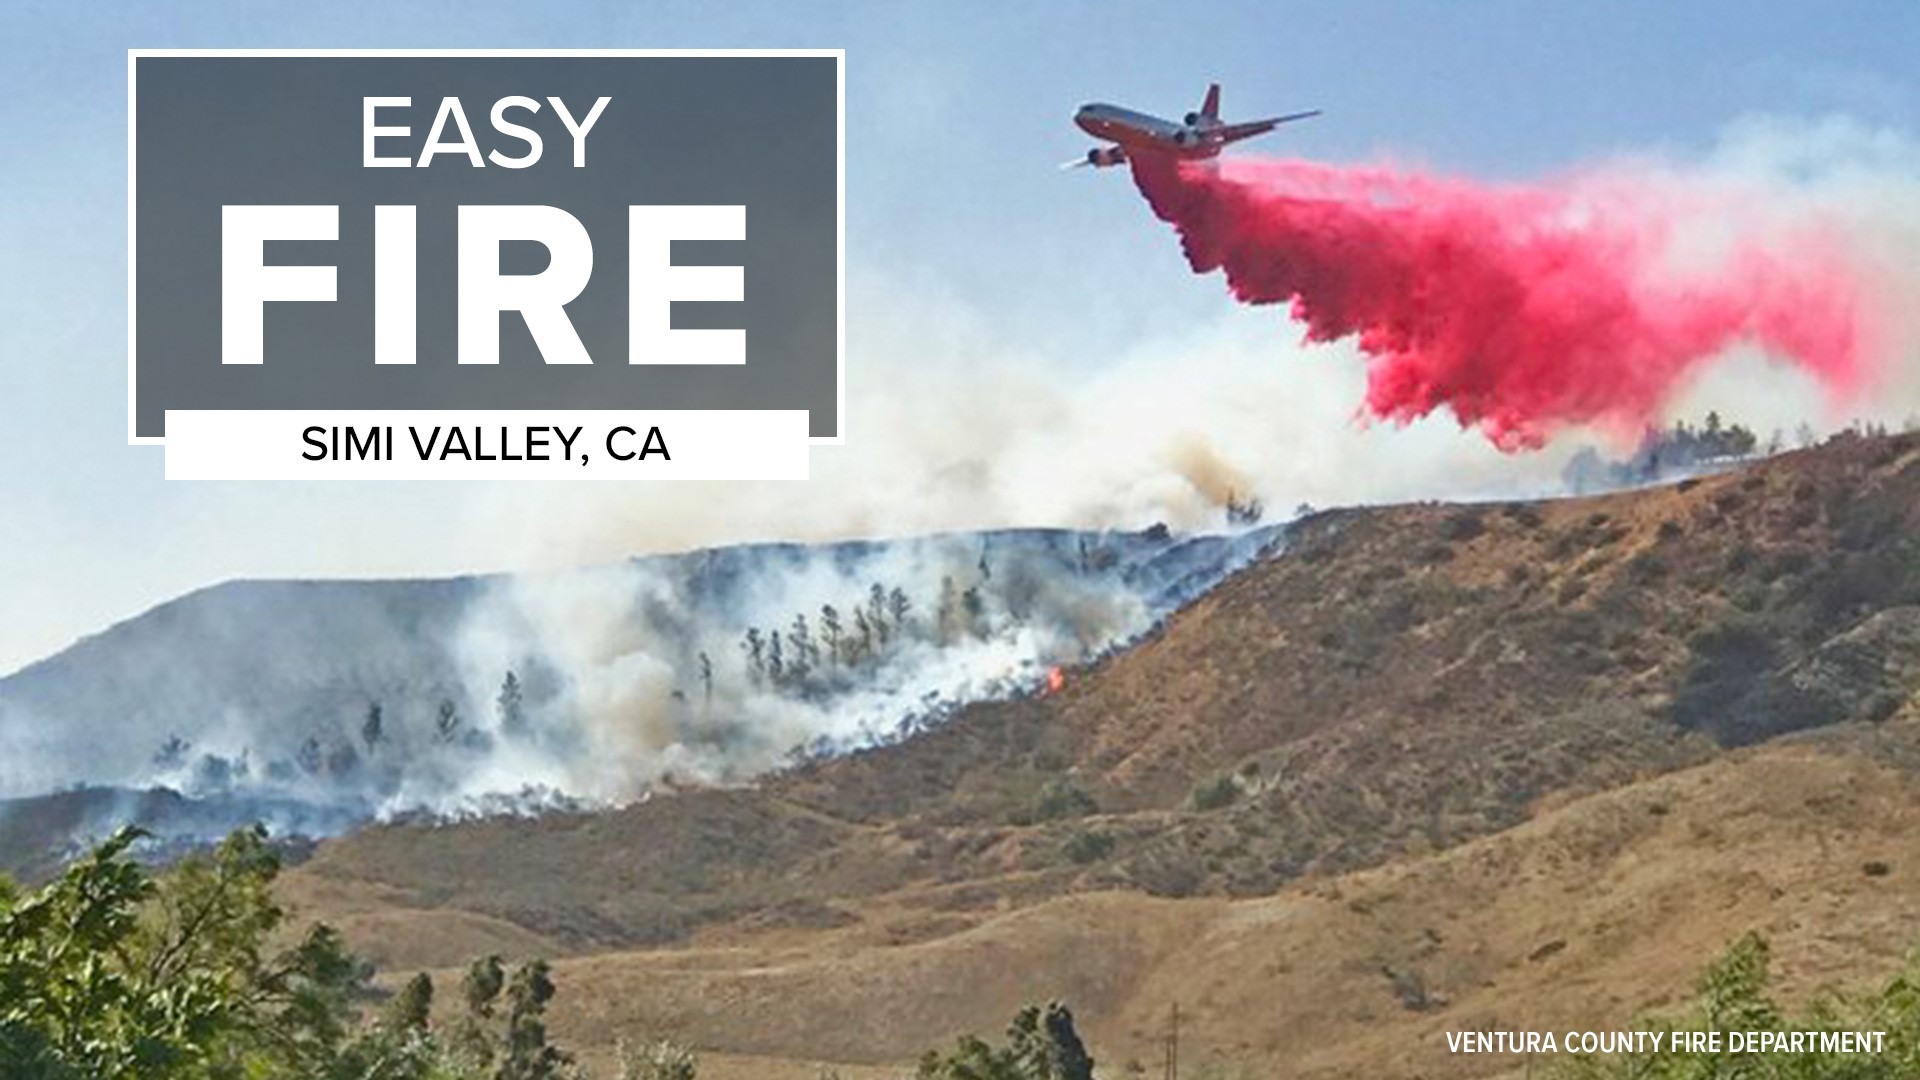 Easy Fire in Simi Valley fully contained